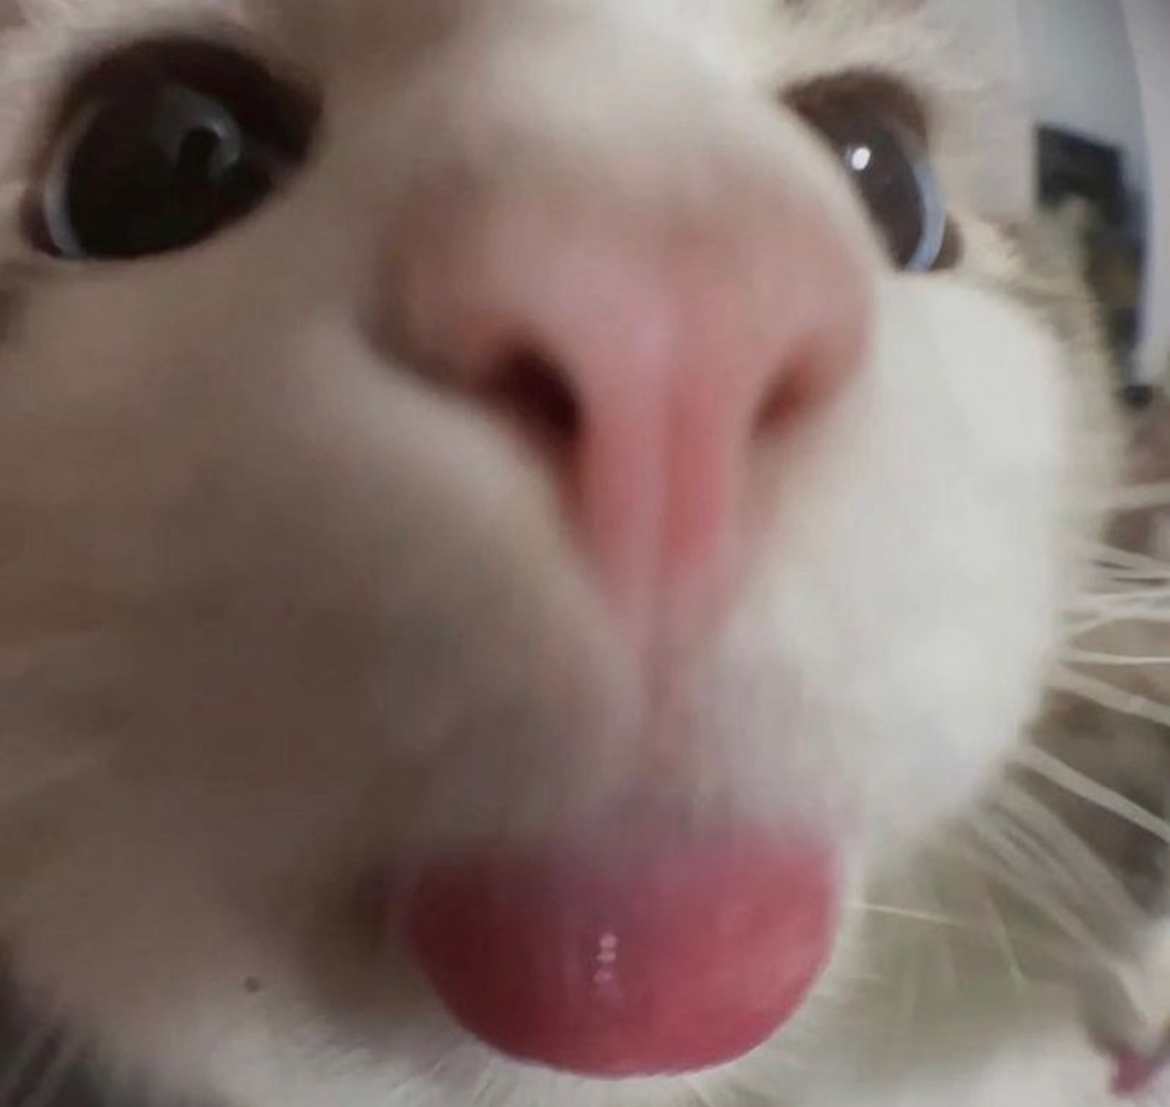 a cat poking its tongue out